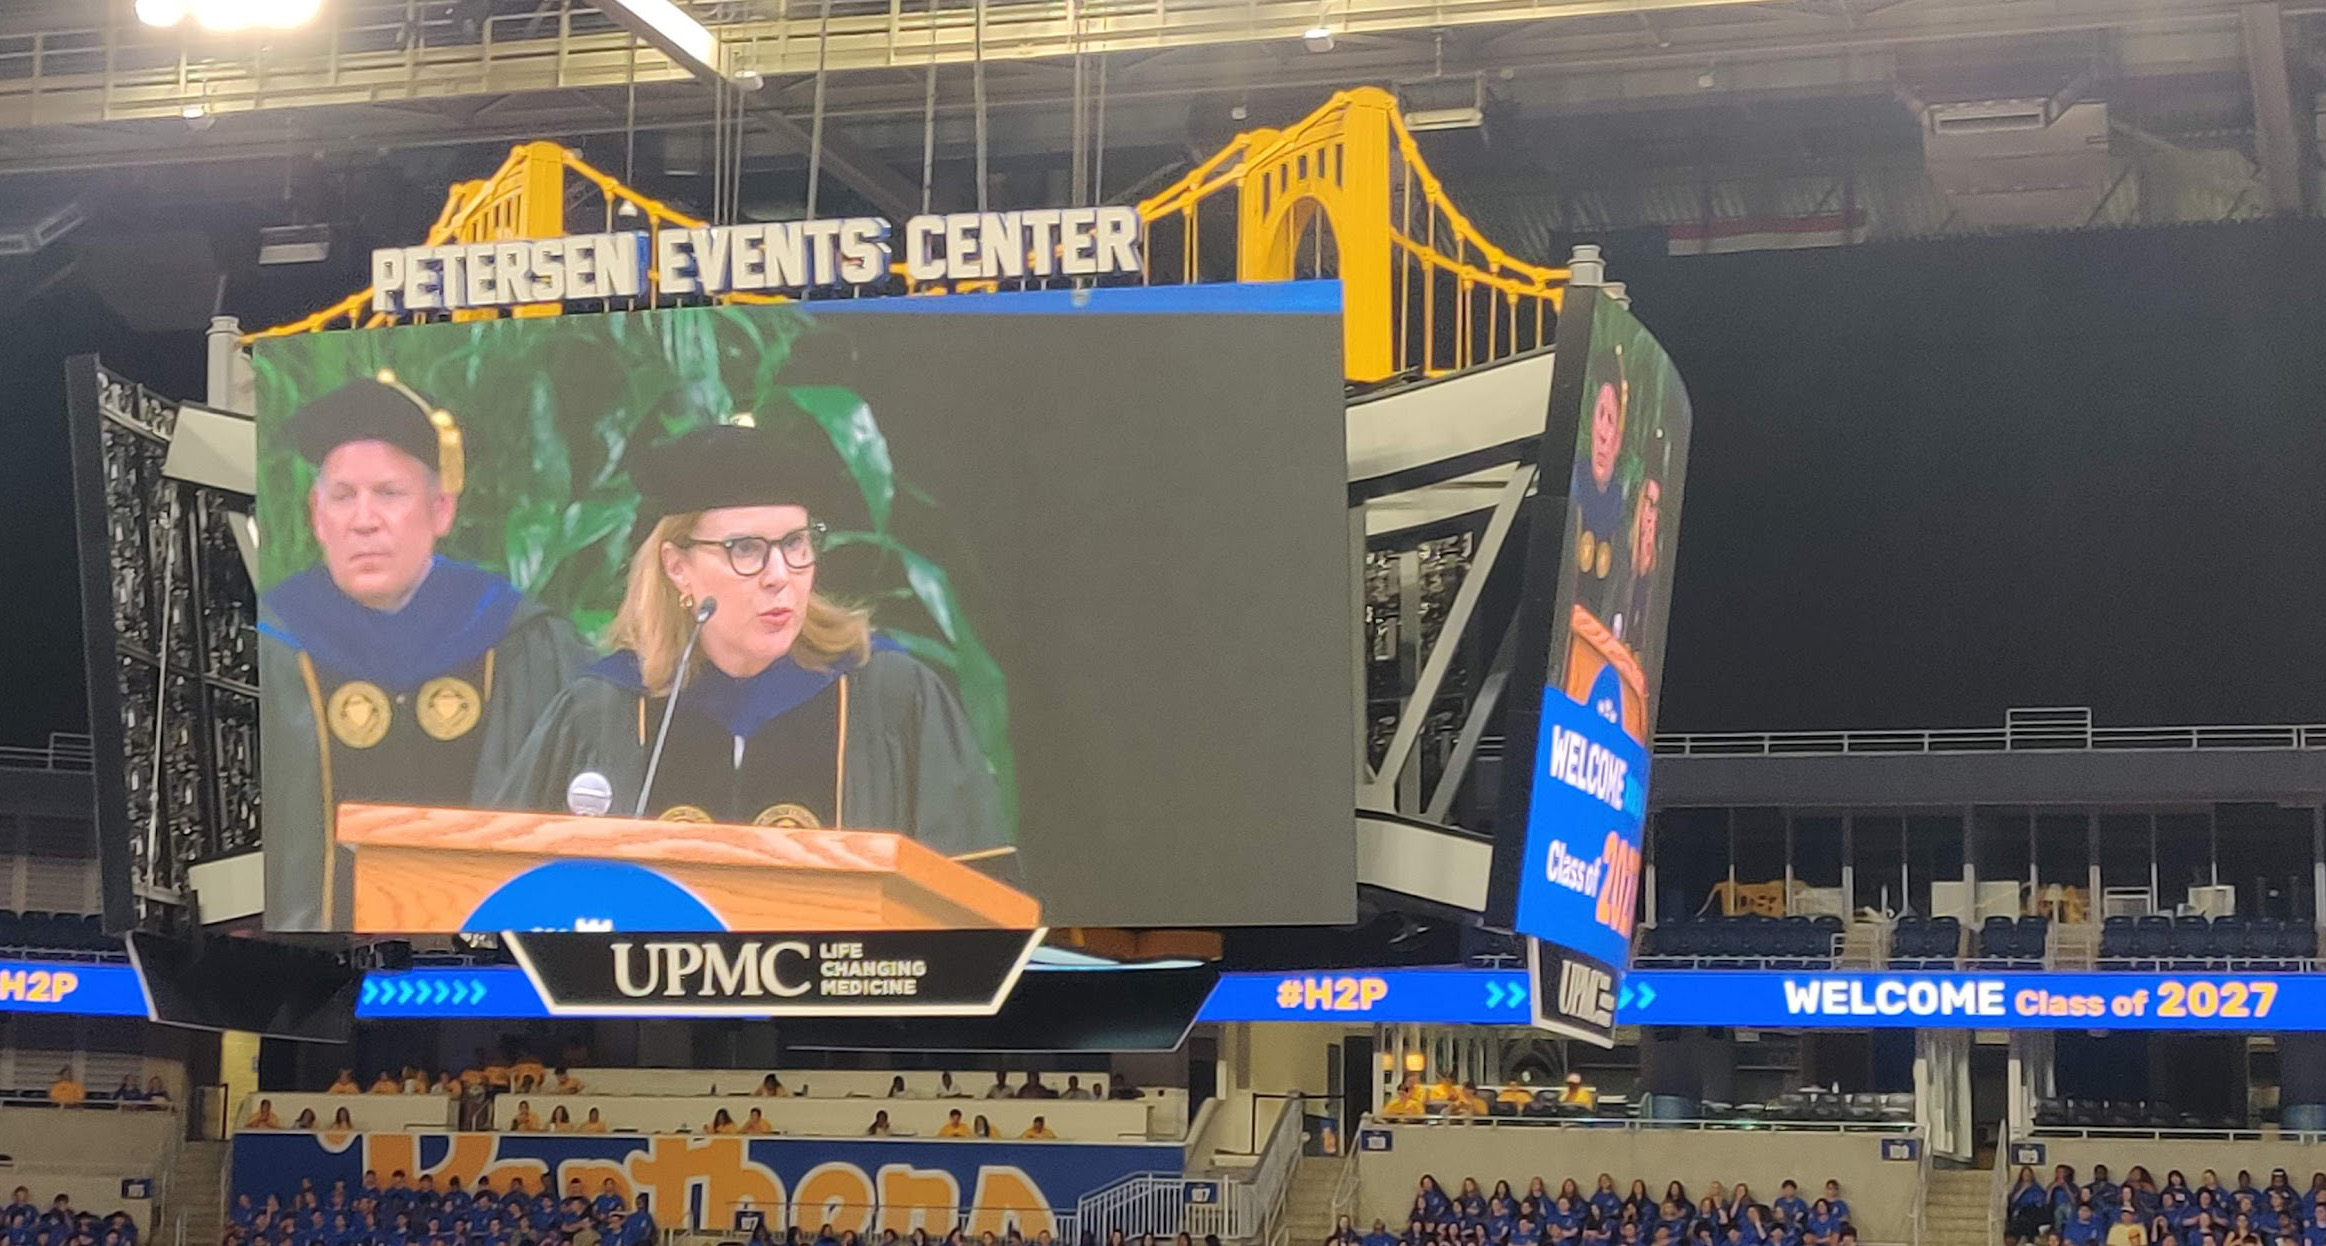 Joan Gabel on screen at student convocation